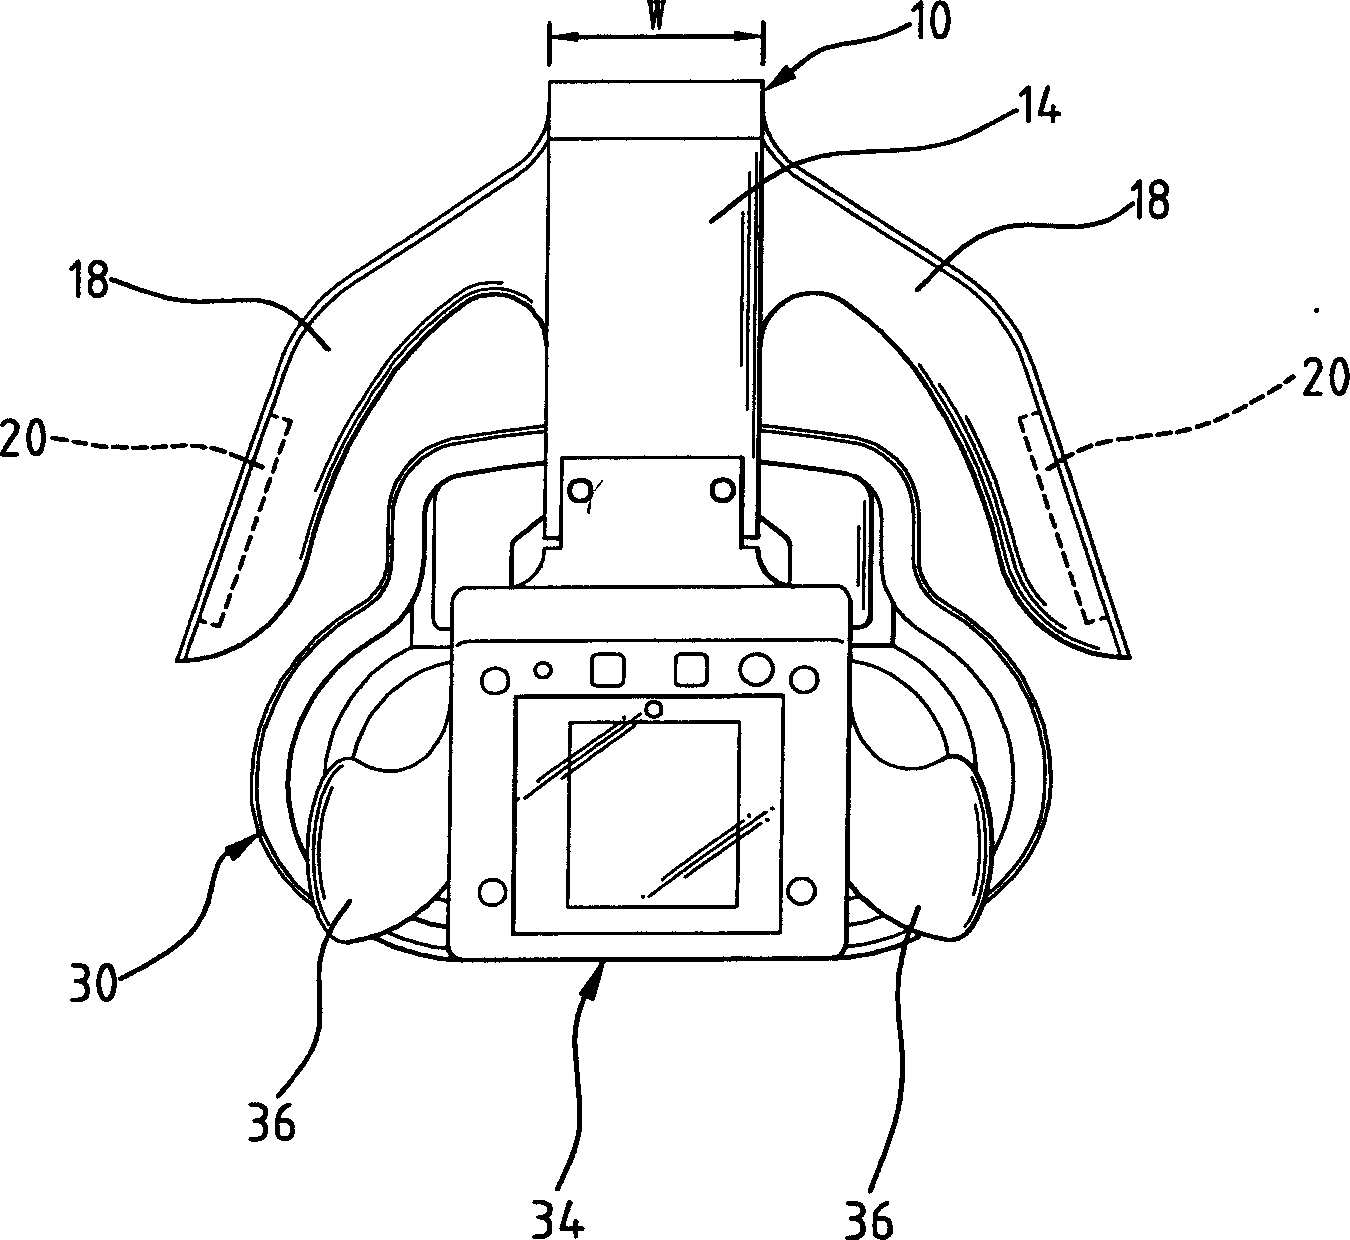 Head-mounting device